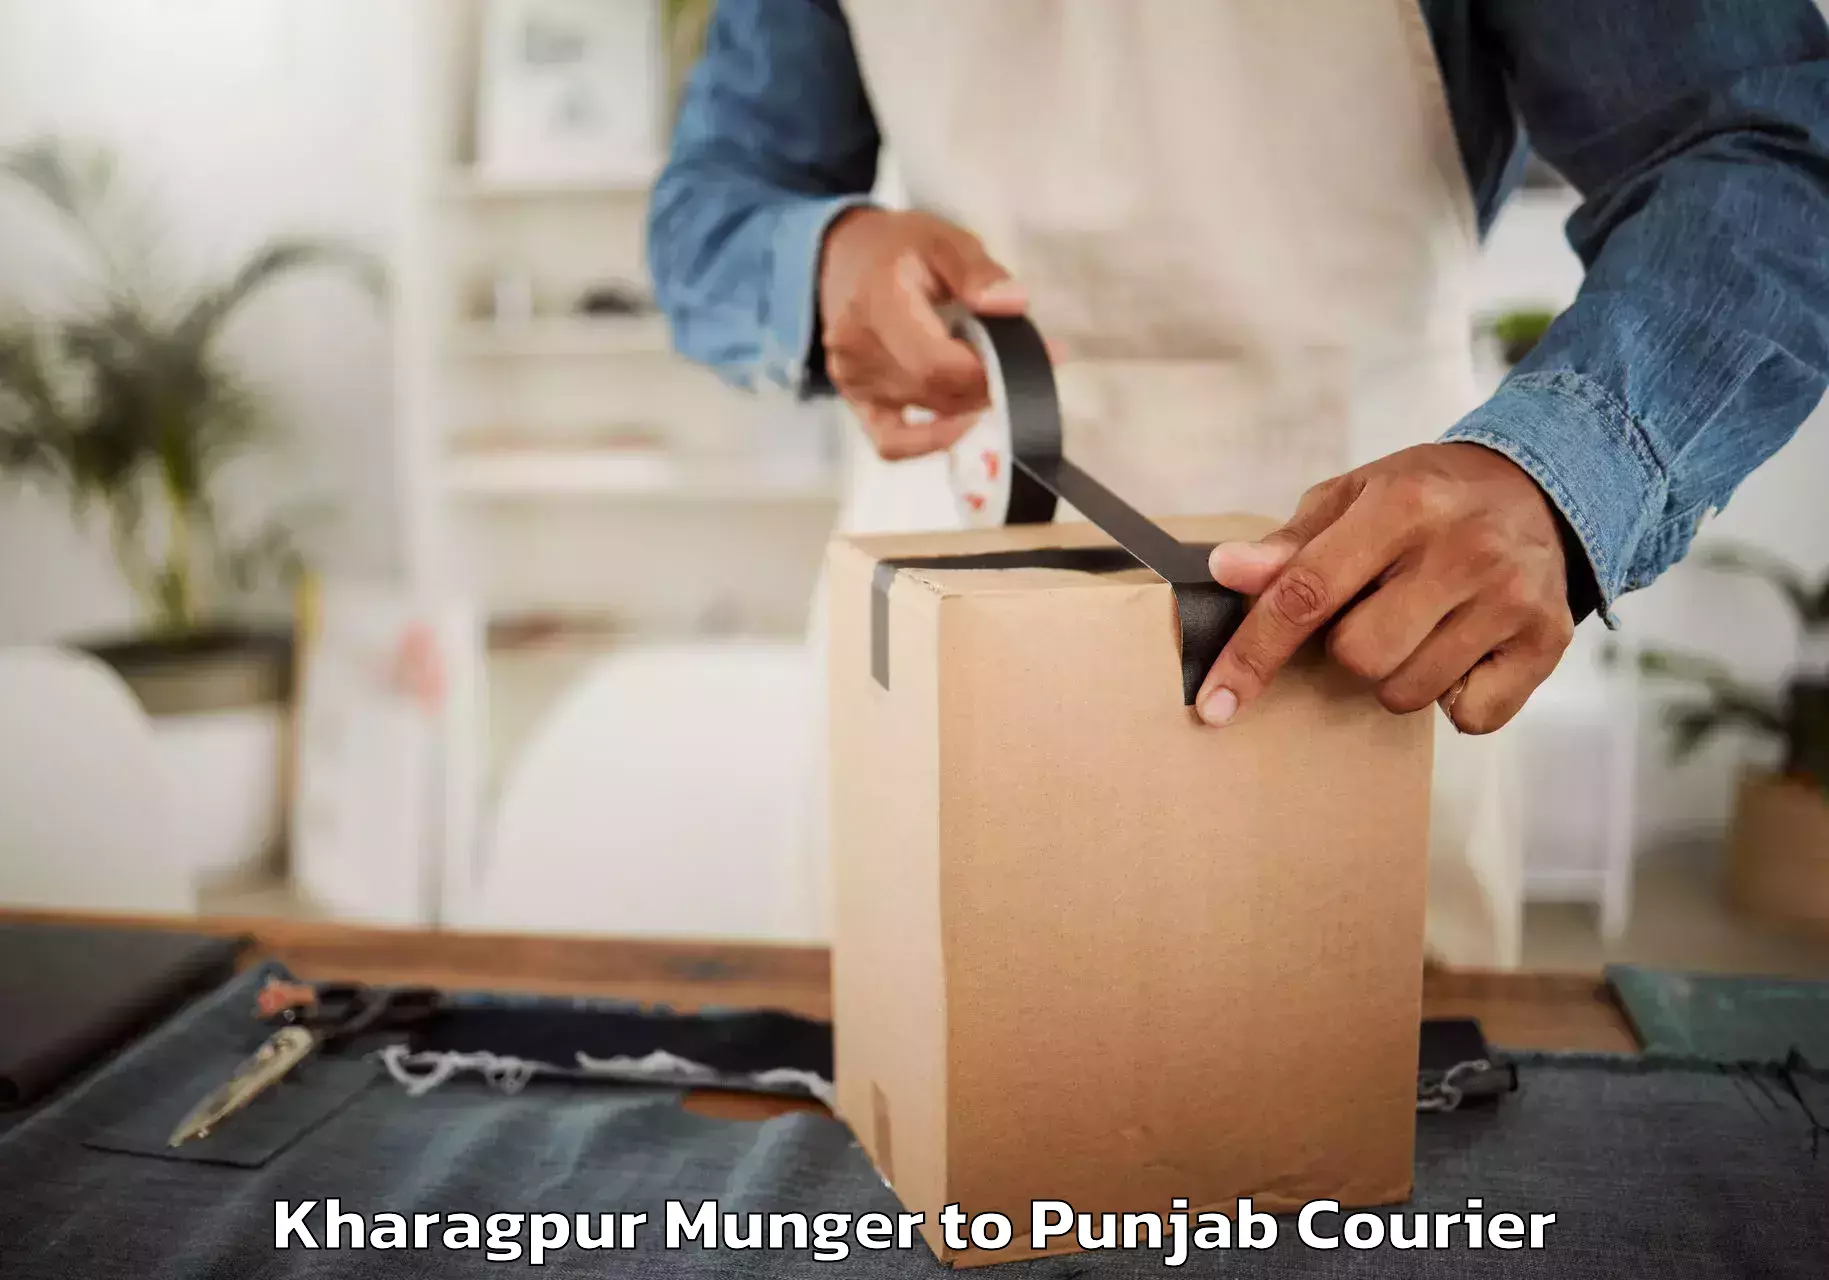 Professional movers and packers Kharagpur Munger to Sultanpur Lodhi